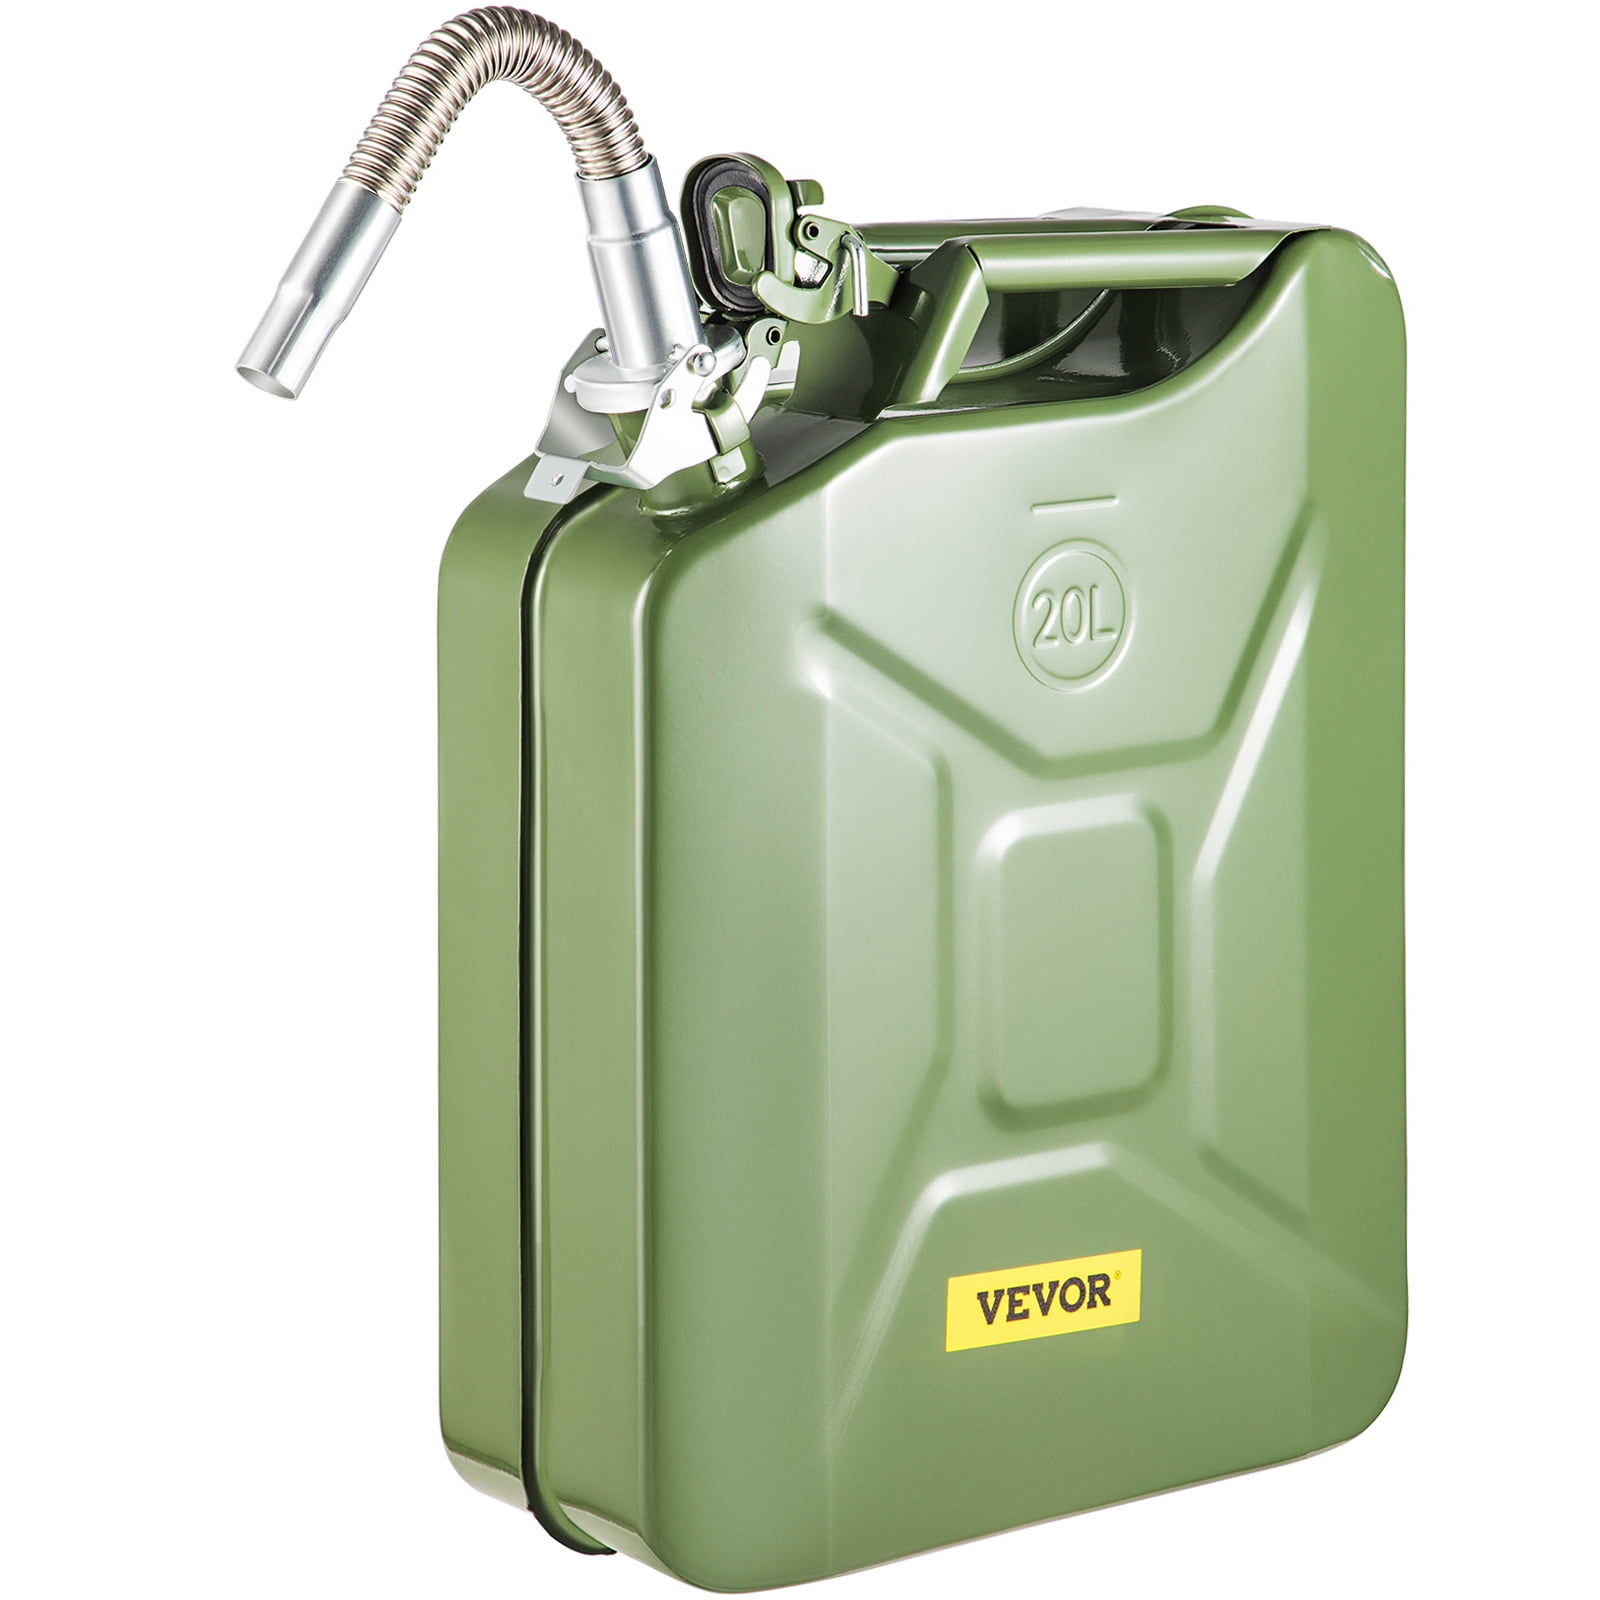 Army Green Petrol Cans Container Store with Spout for Fuel Oil Petrol Diesel Portable New 20L Metal Can for Petrol and Diesel Jerry Can 0.8 mm Metal Body thickness 